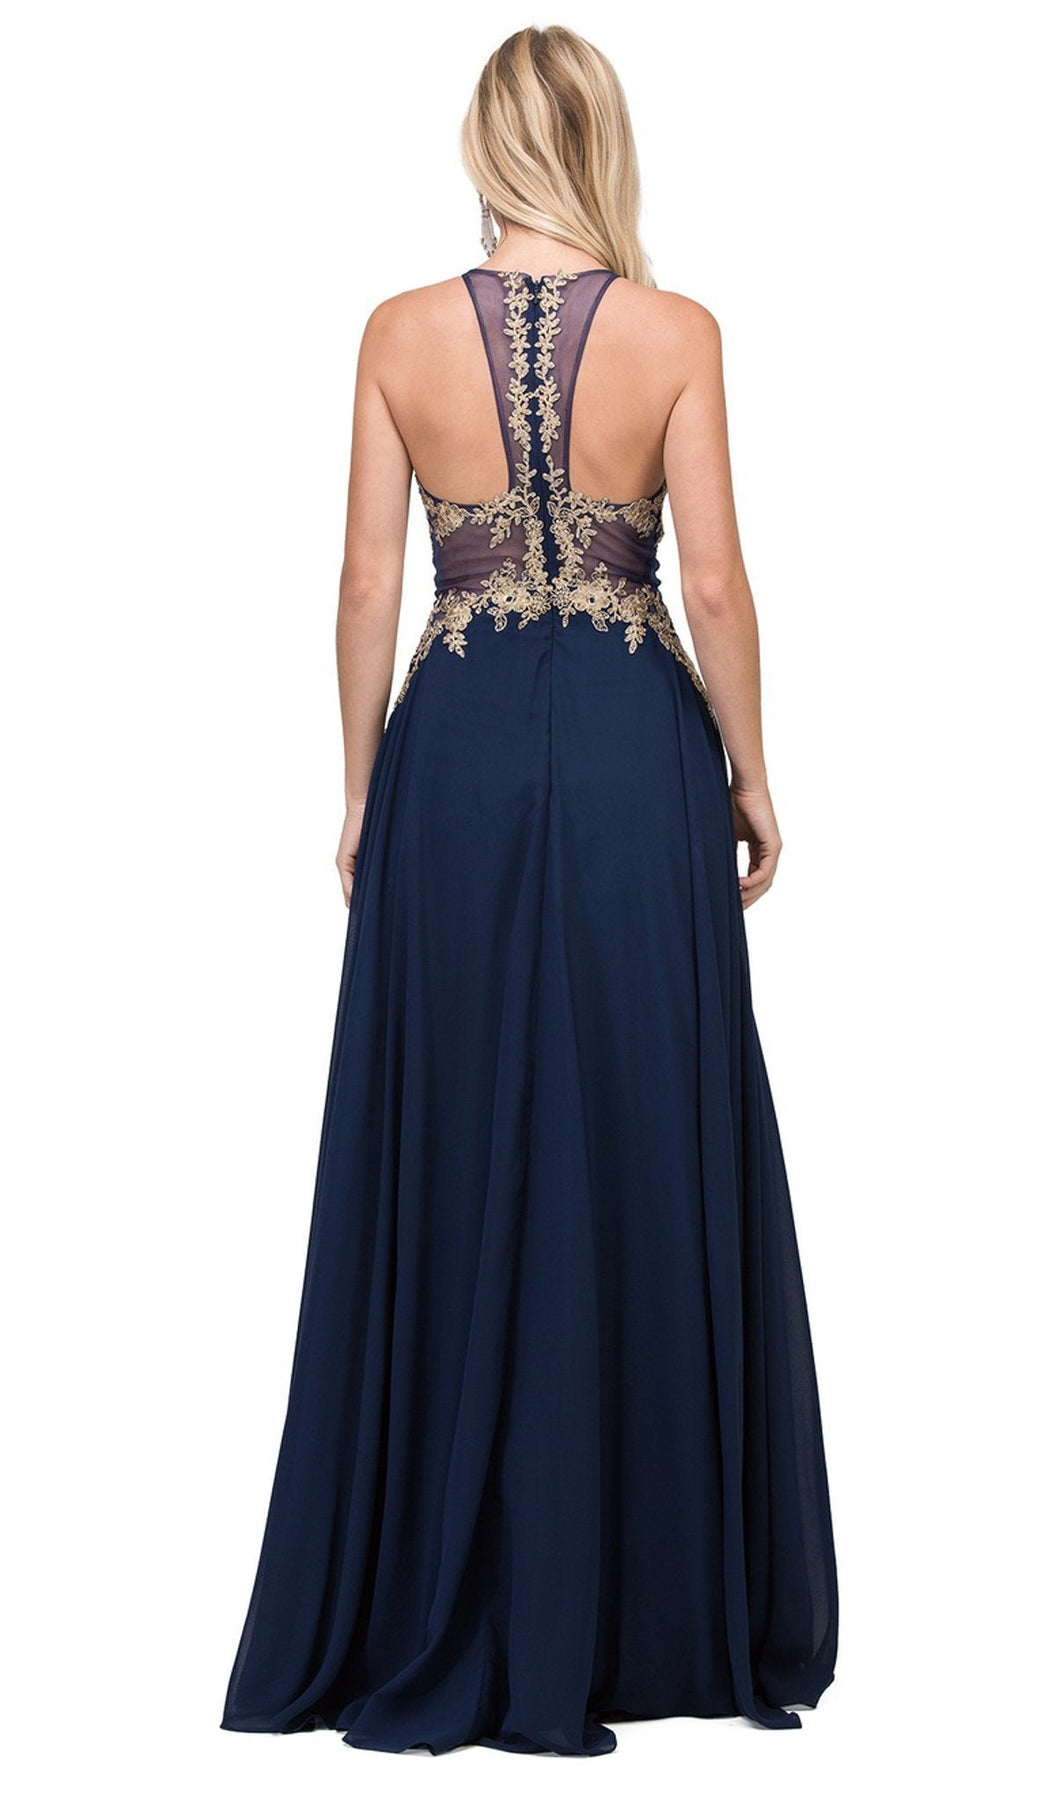 Dancing Queen - 2297 Sheer Embroidered Pleated Prom Dress Special Occasion Dress